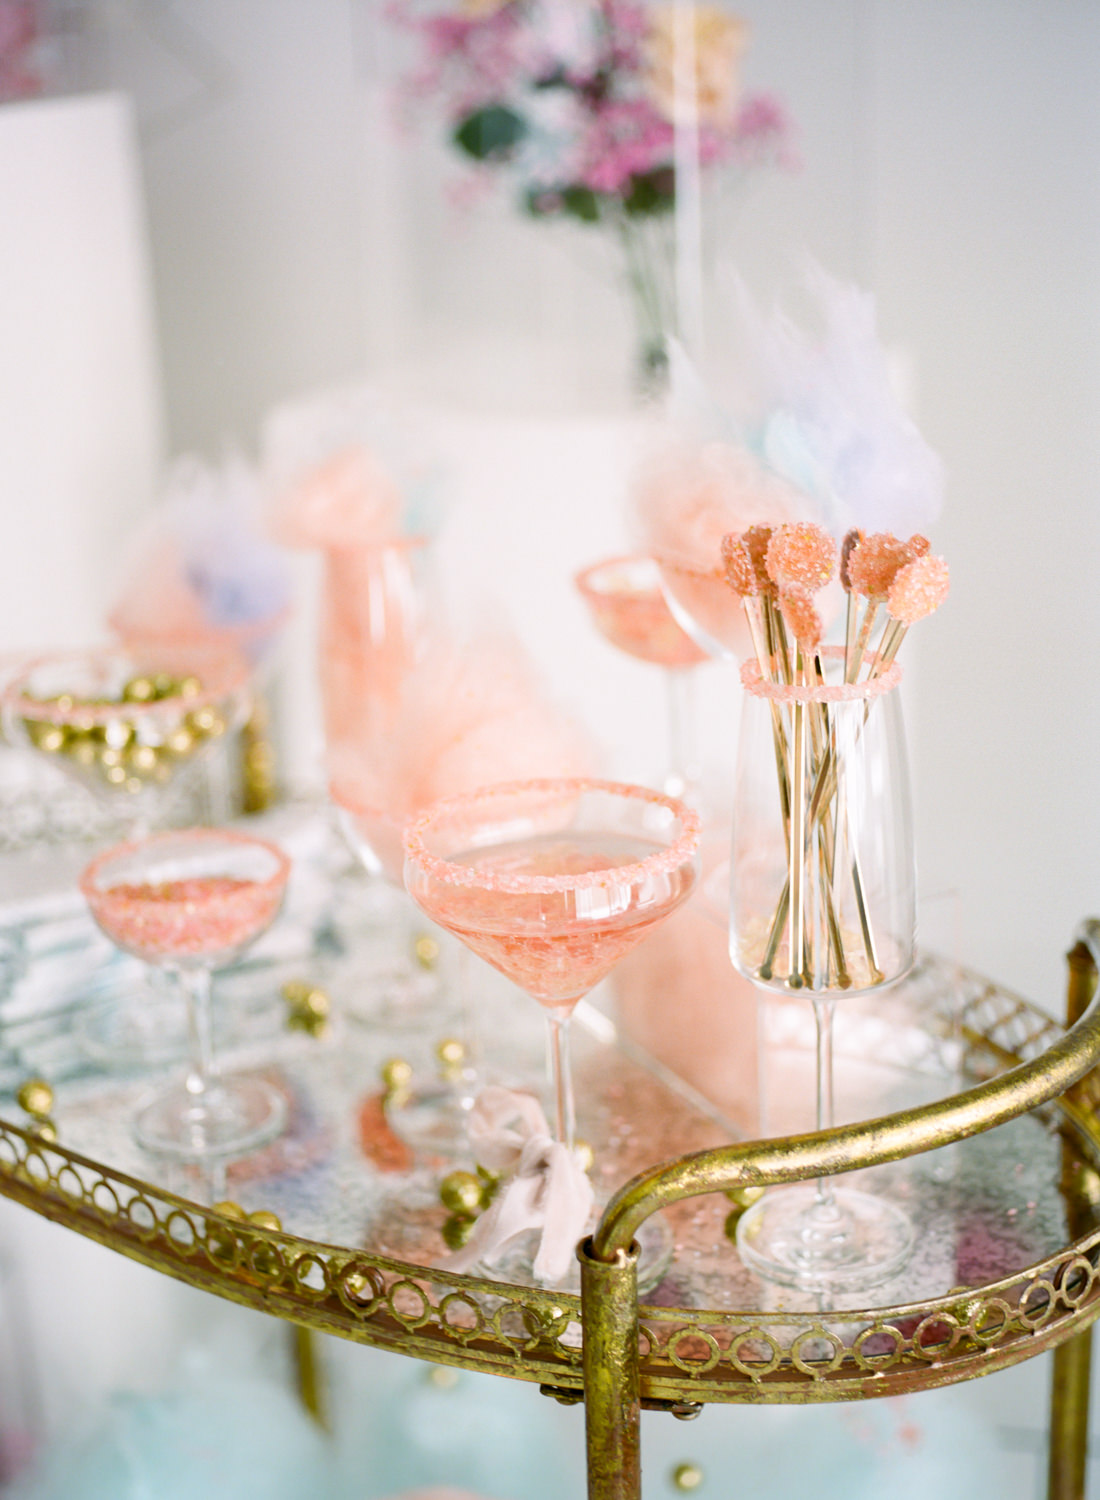 Sara Elizabeth weddings, Fancy Sprinkles cocktail rim and candy on Crate and Barrel bar cart, St. Louis wedding photographer